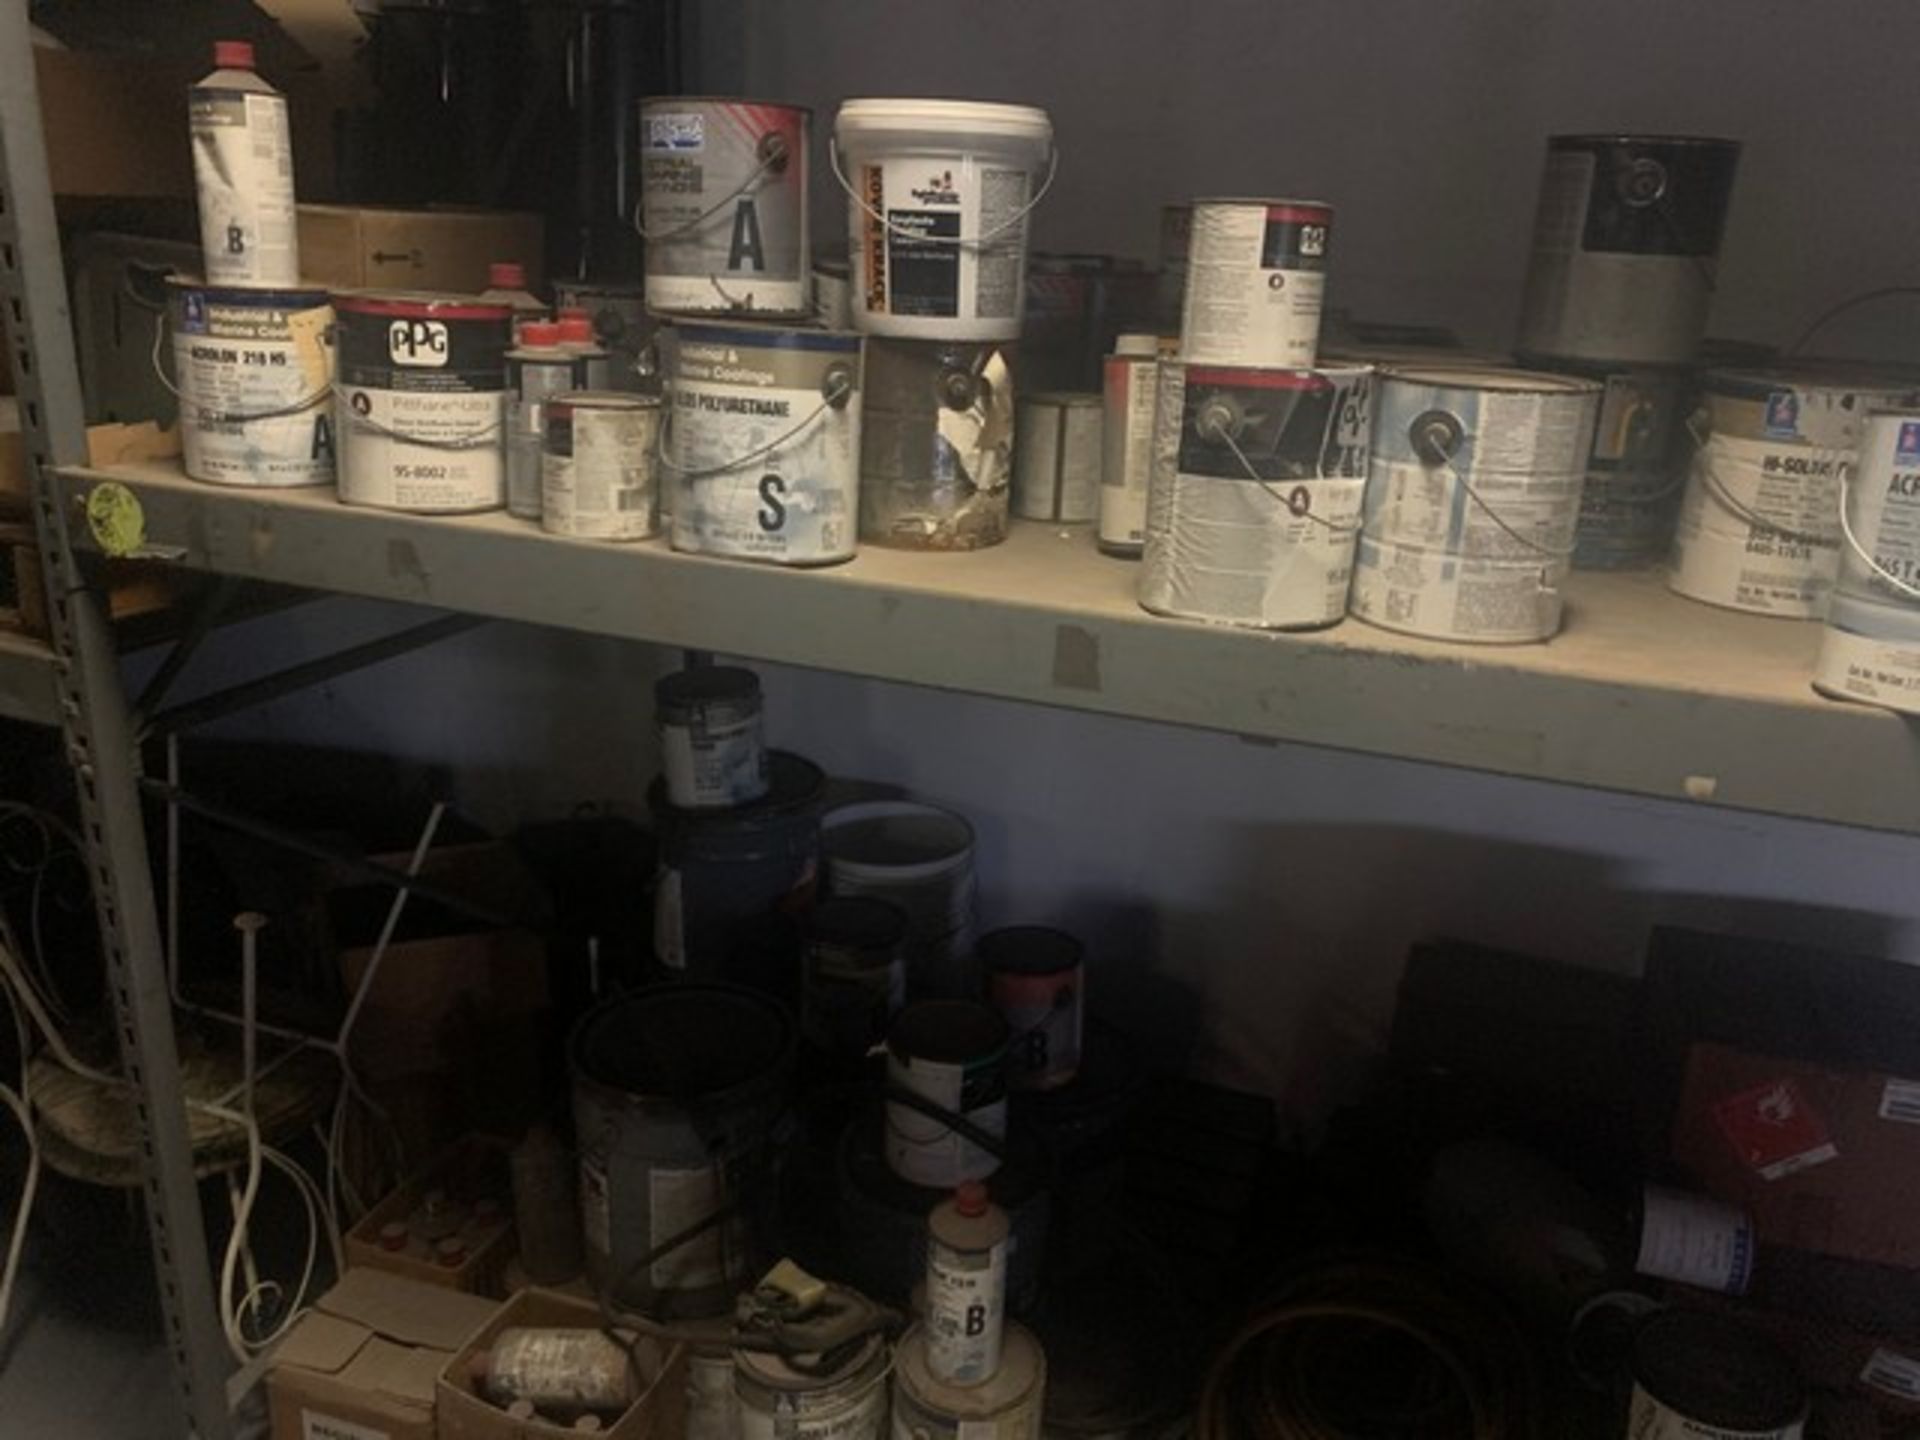 SKIDS ASSORTED PAINTS, ADHESIVES, ETC - 1 GALLON CANS & 5 GALLON CANS - Image 3 of 8